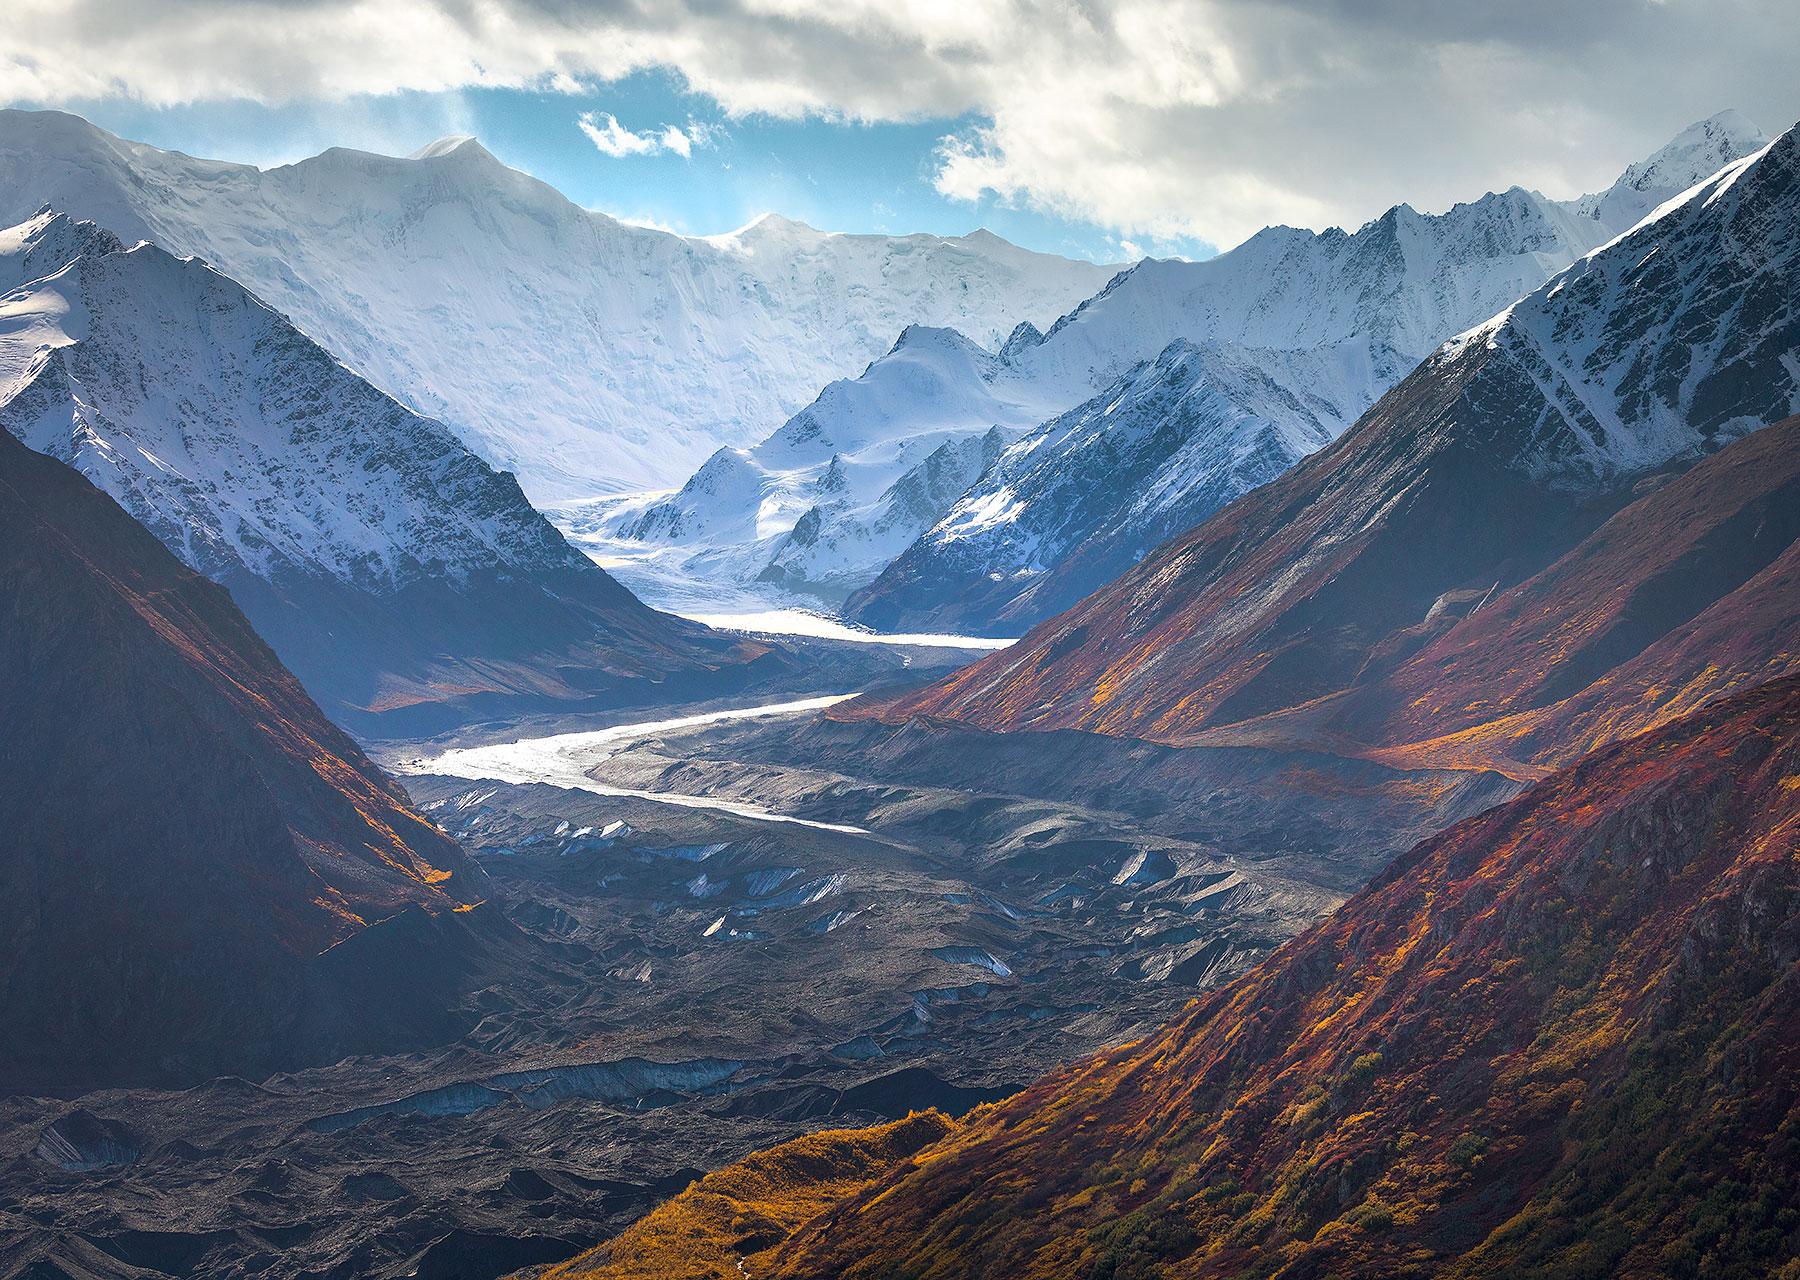 I love the illustration here of the transition from Fall to Winter in the mountains of the Chugach Range.